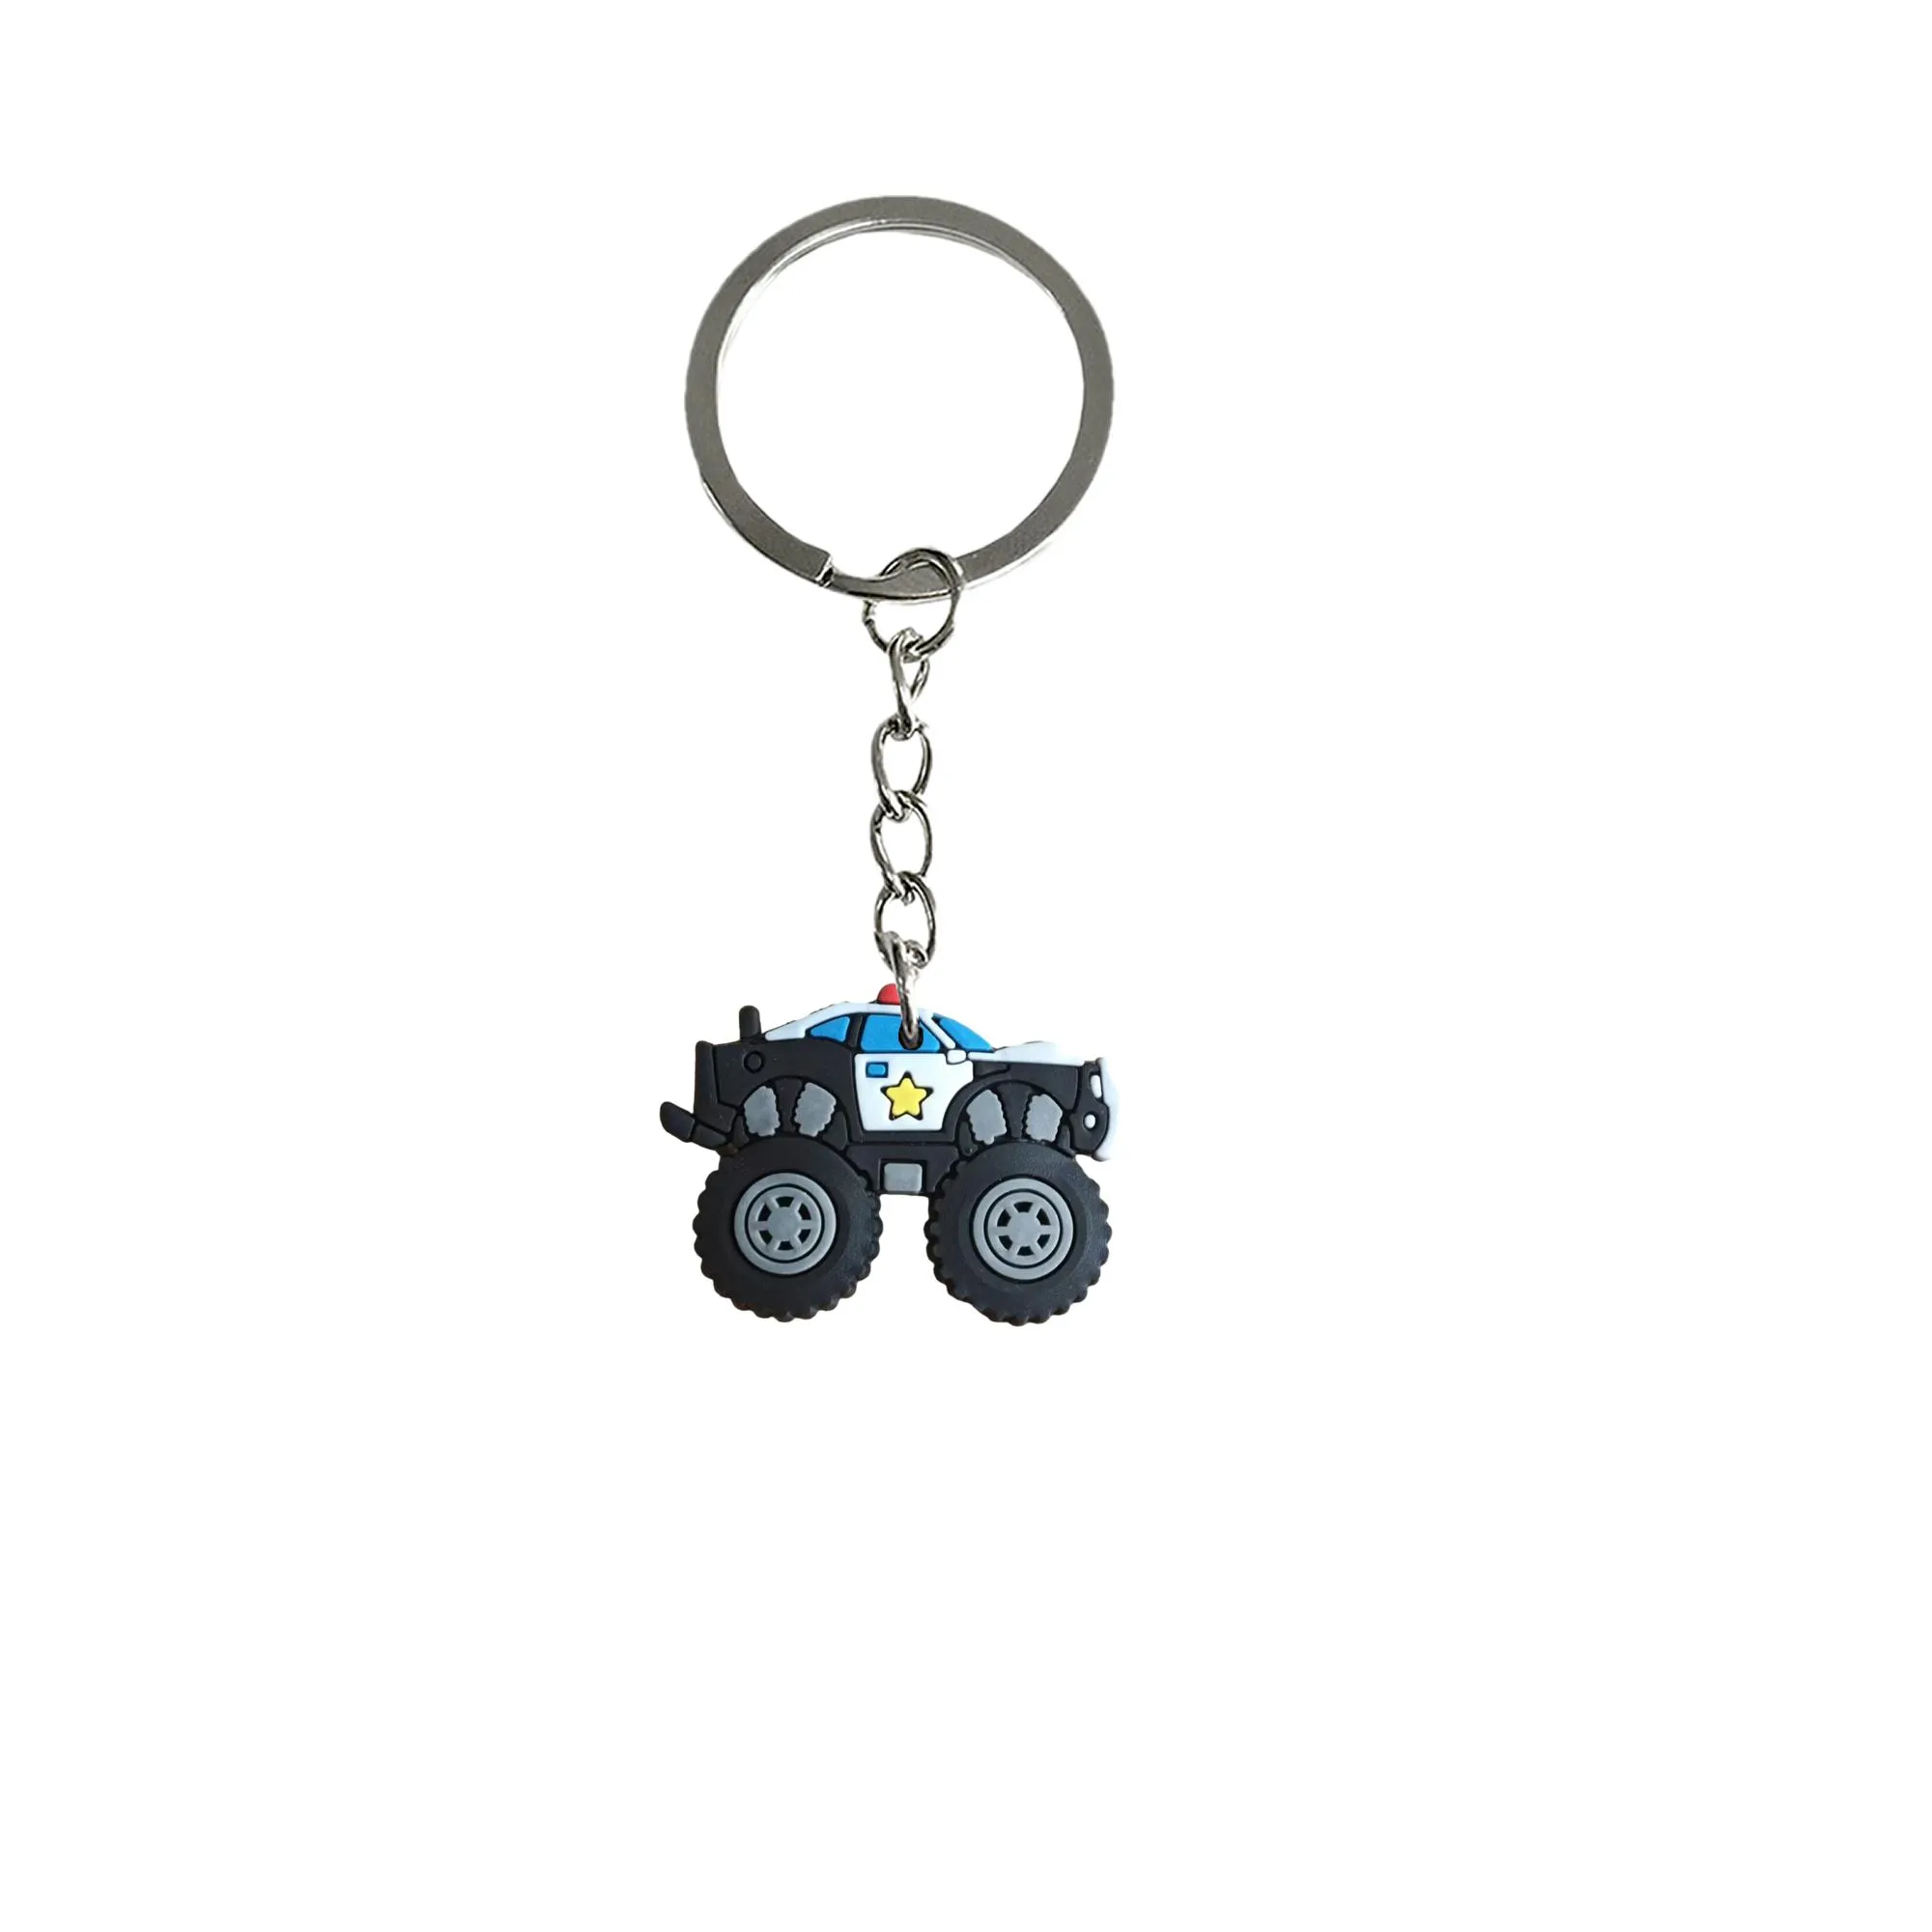 truck 9 keychain key chain for girls keychains childrens party favors keyring men suitable schoolbag kid boy girl gift